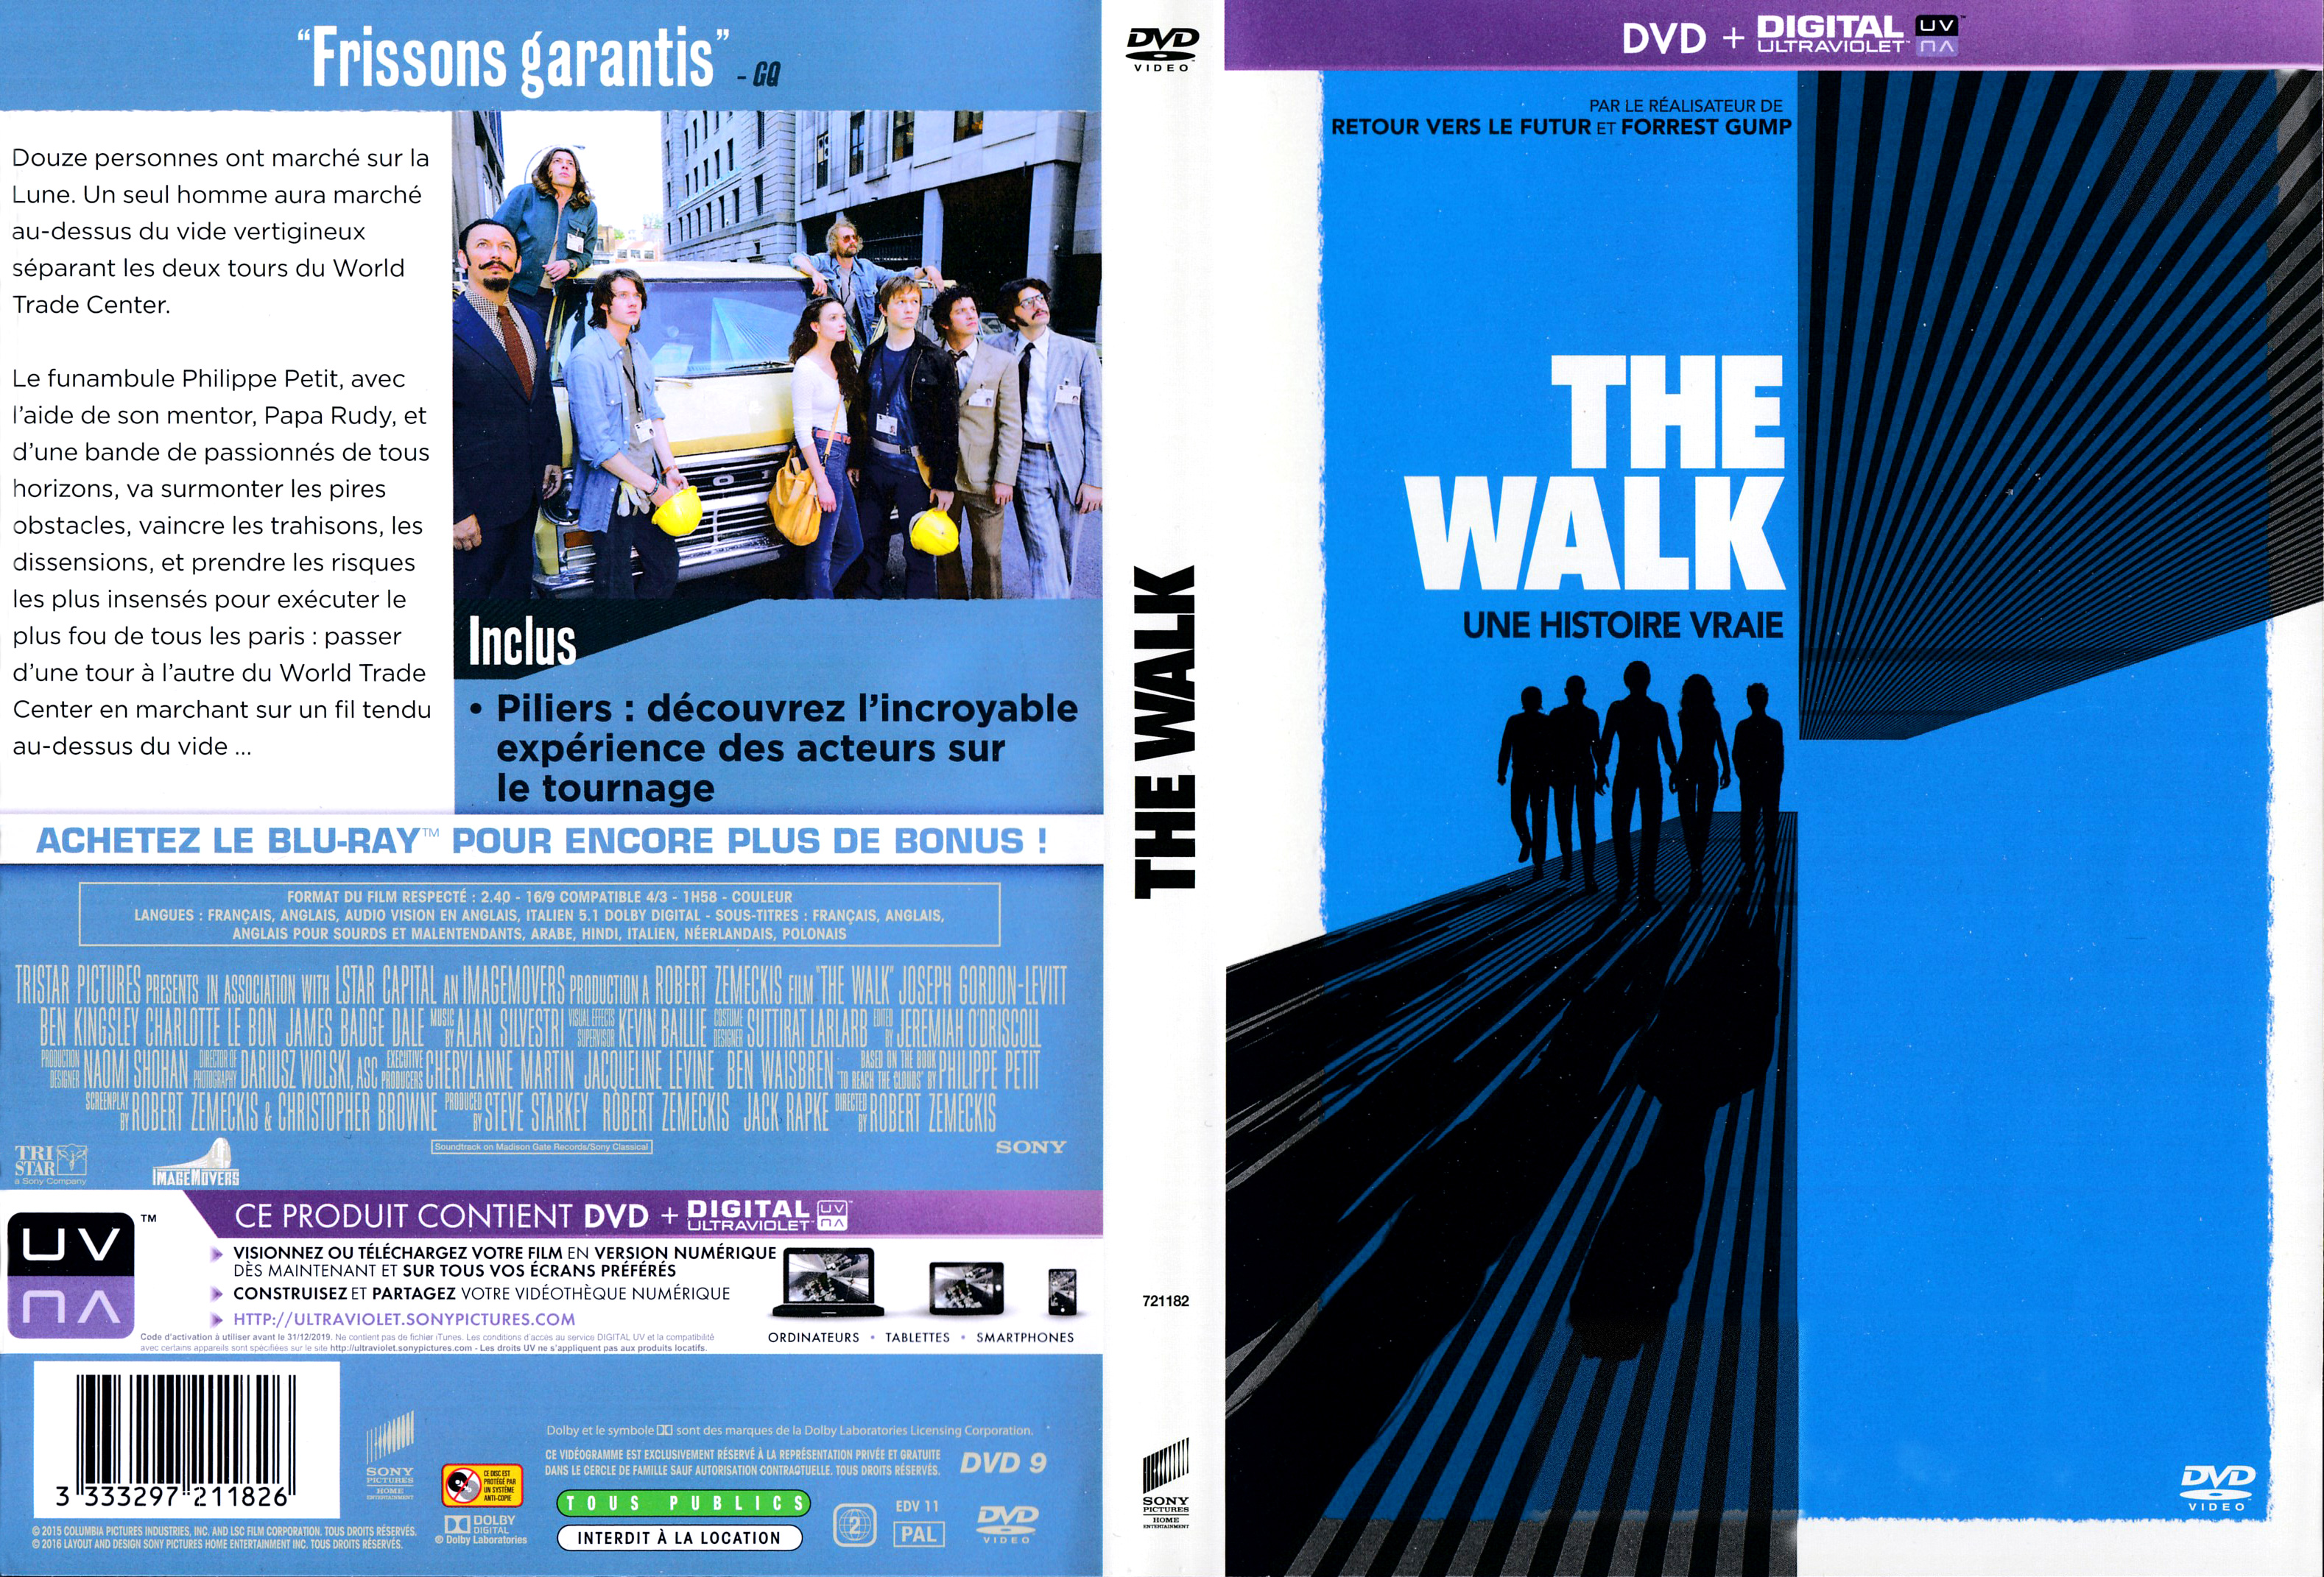 Jaquette DVD The Walk